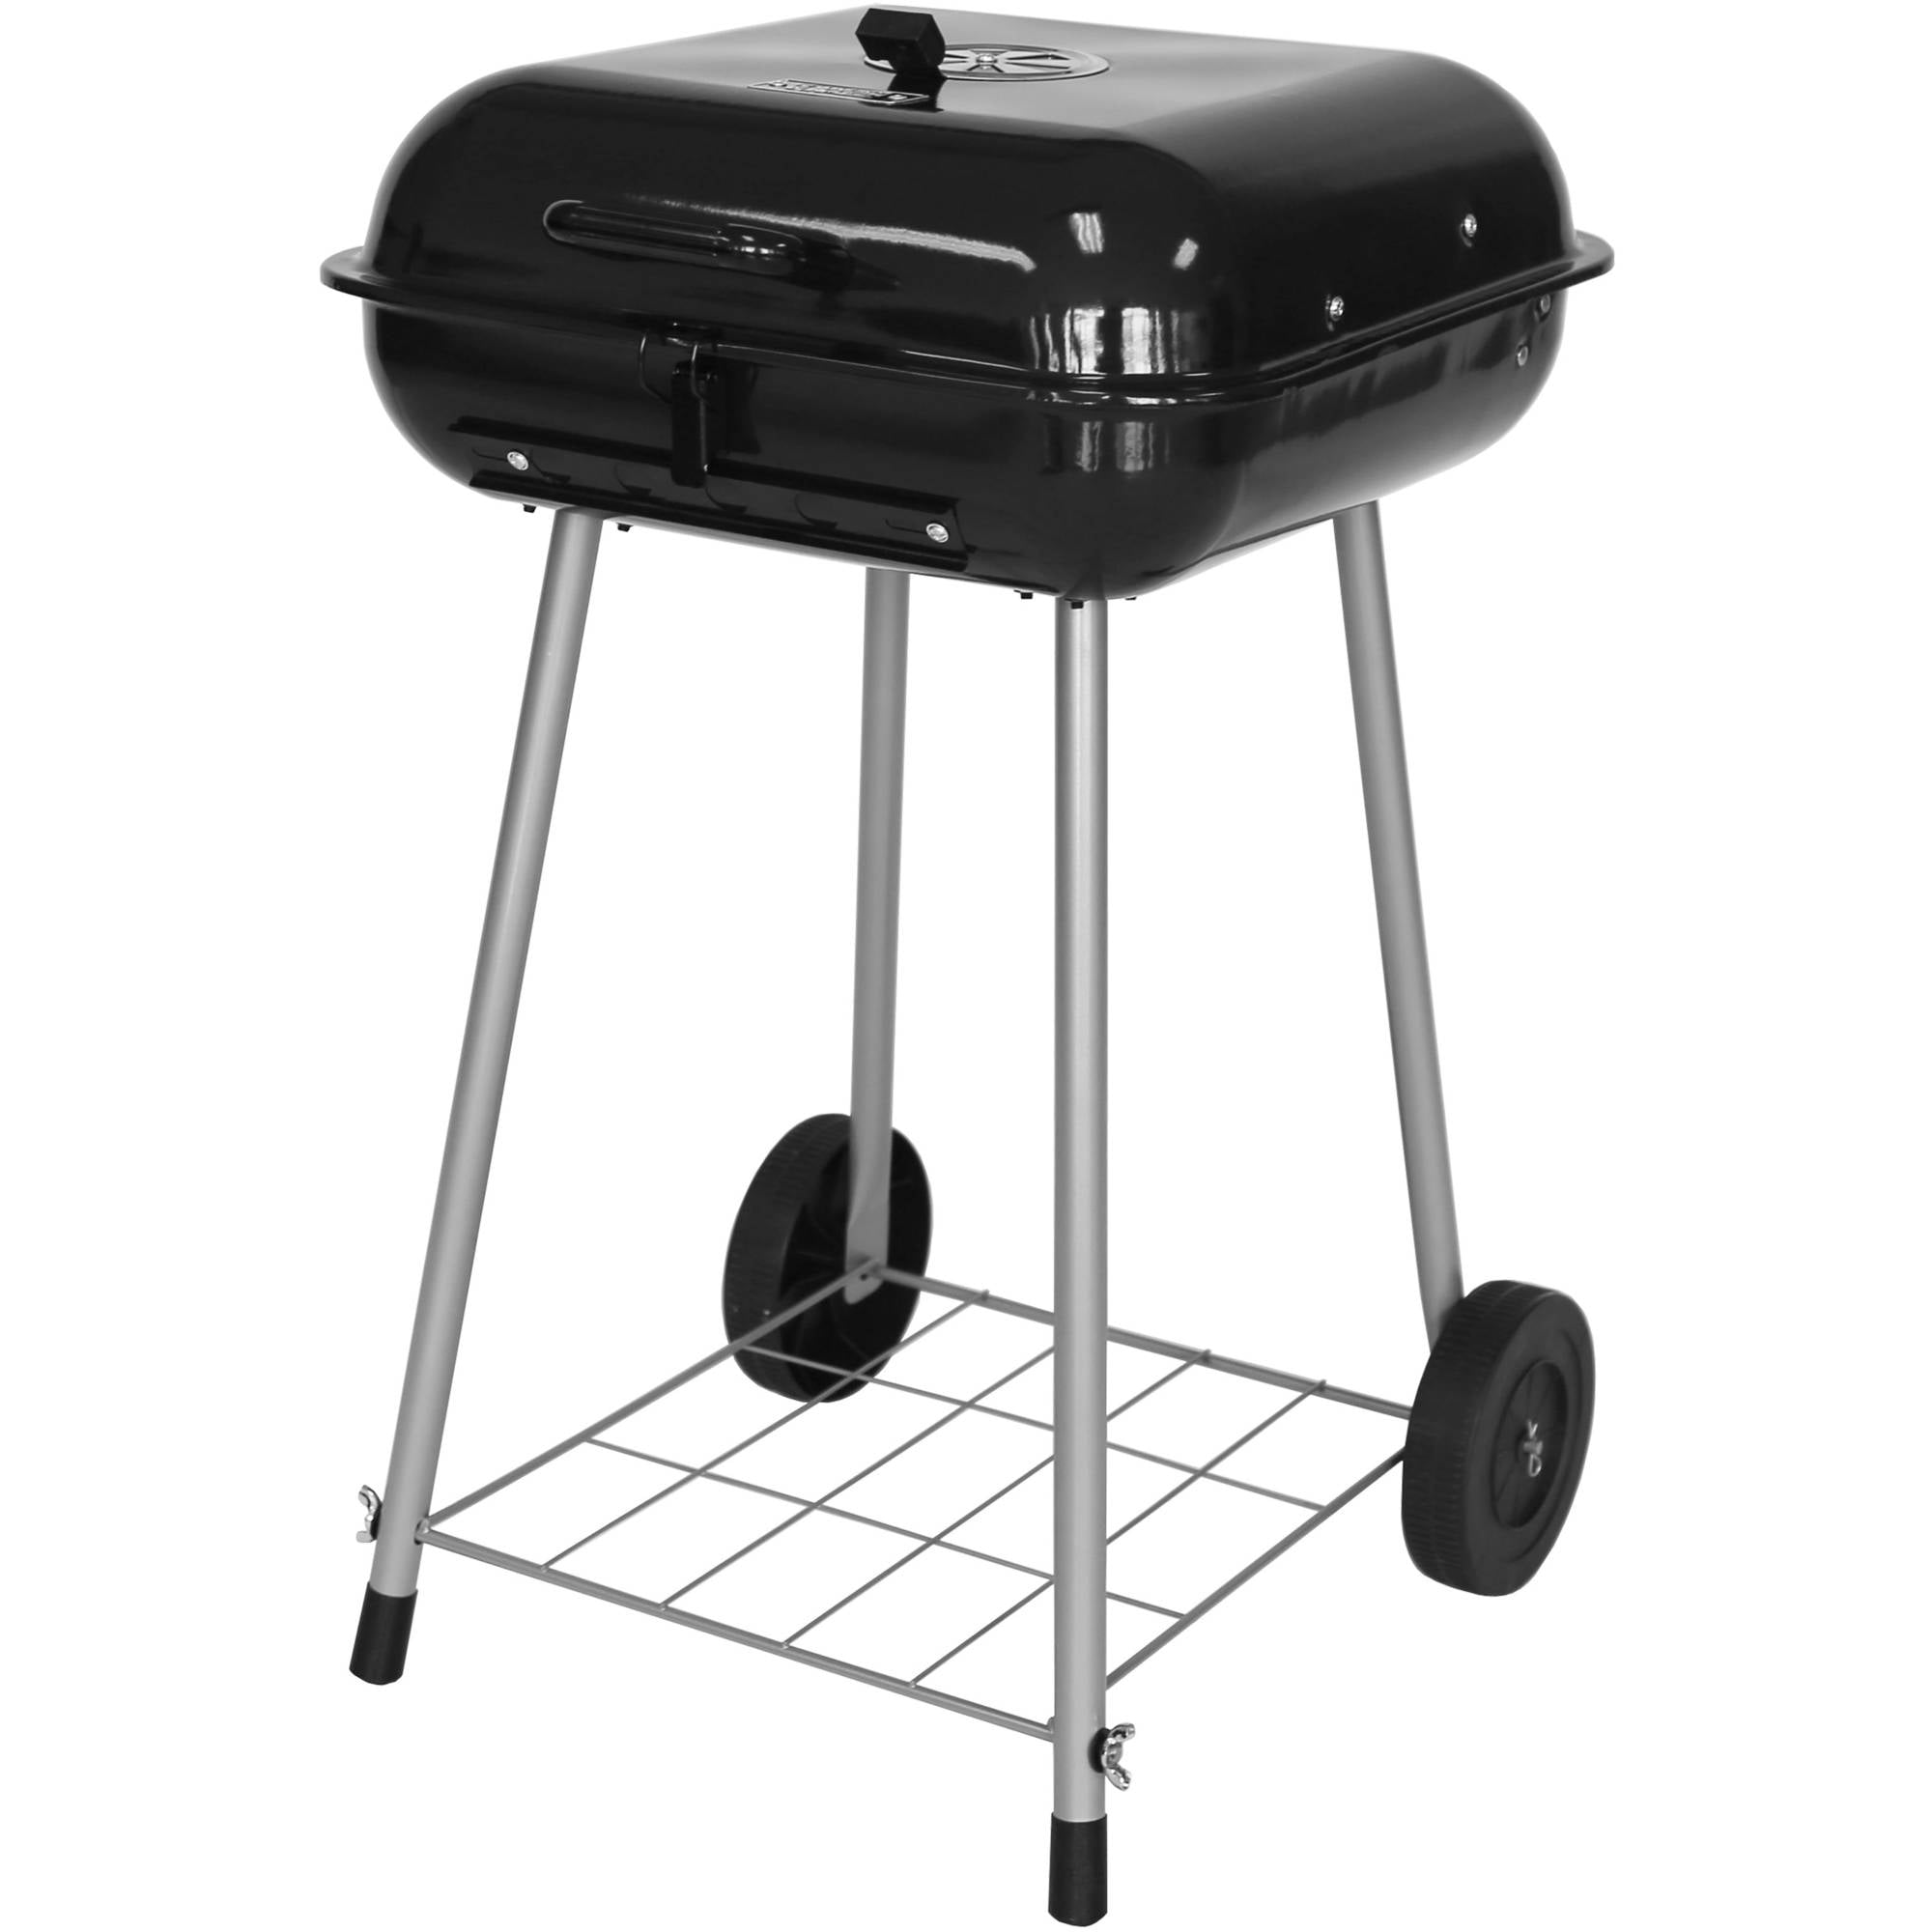 Bottom Storage Shelf Porcelain-Coated Firebowl and Lid Expert Grill 17.5-Inch Charcoal Grill 302 Square Inch Cooking Surface--Enough Space to Grill 16 Burgers at Once 